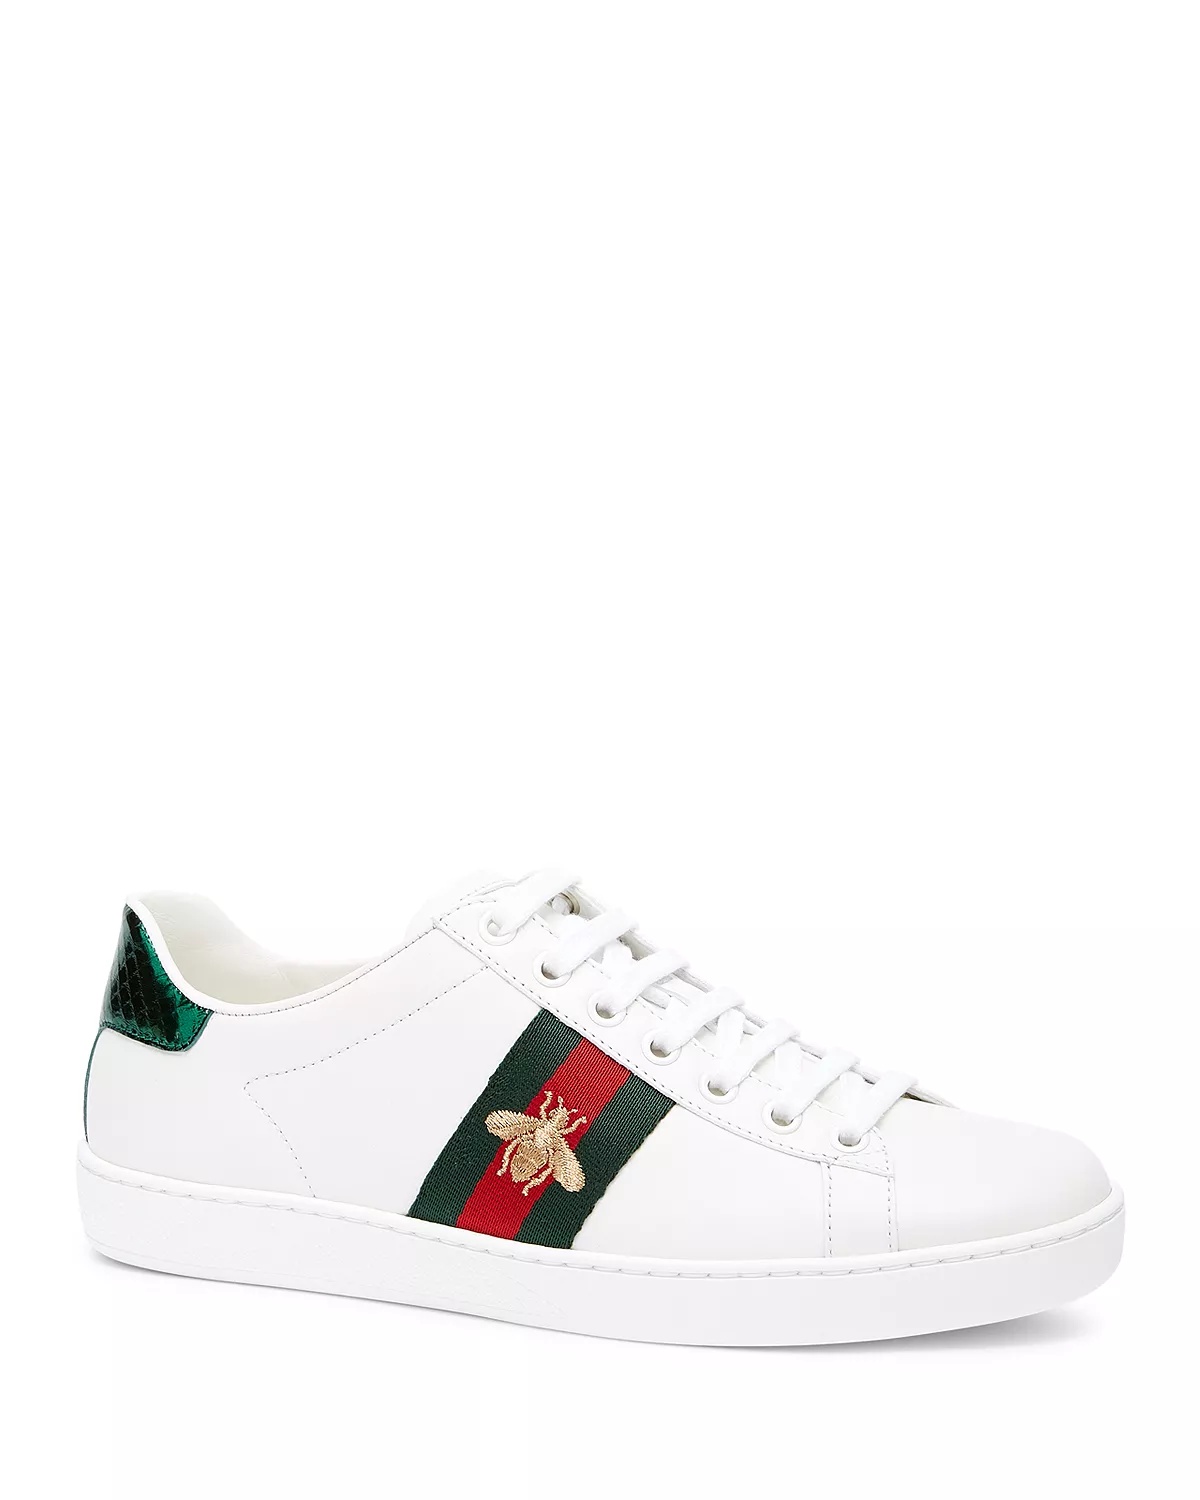 Women's Gucci Ace Embroidered Sneakers - 1